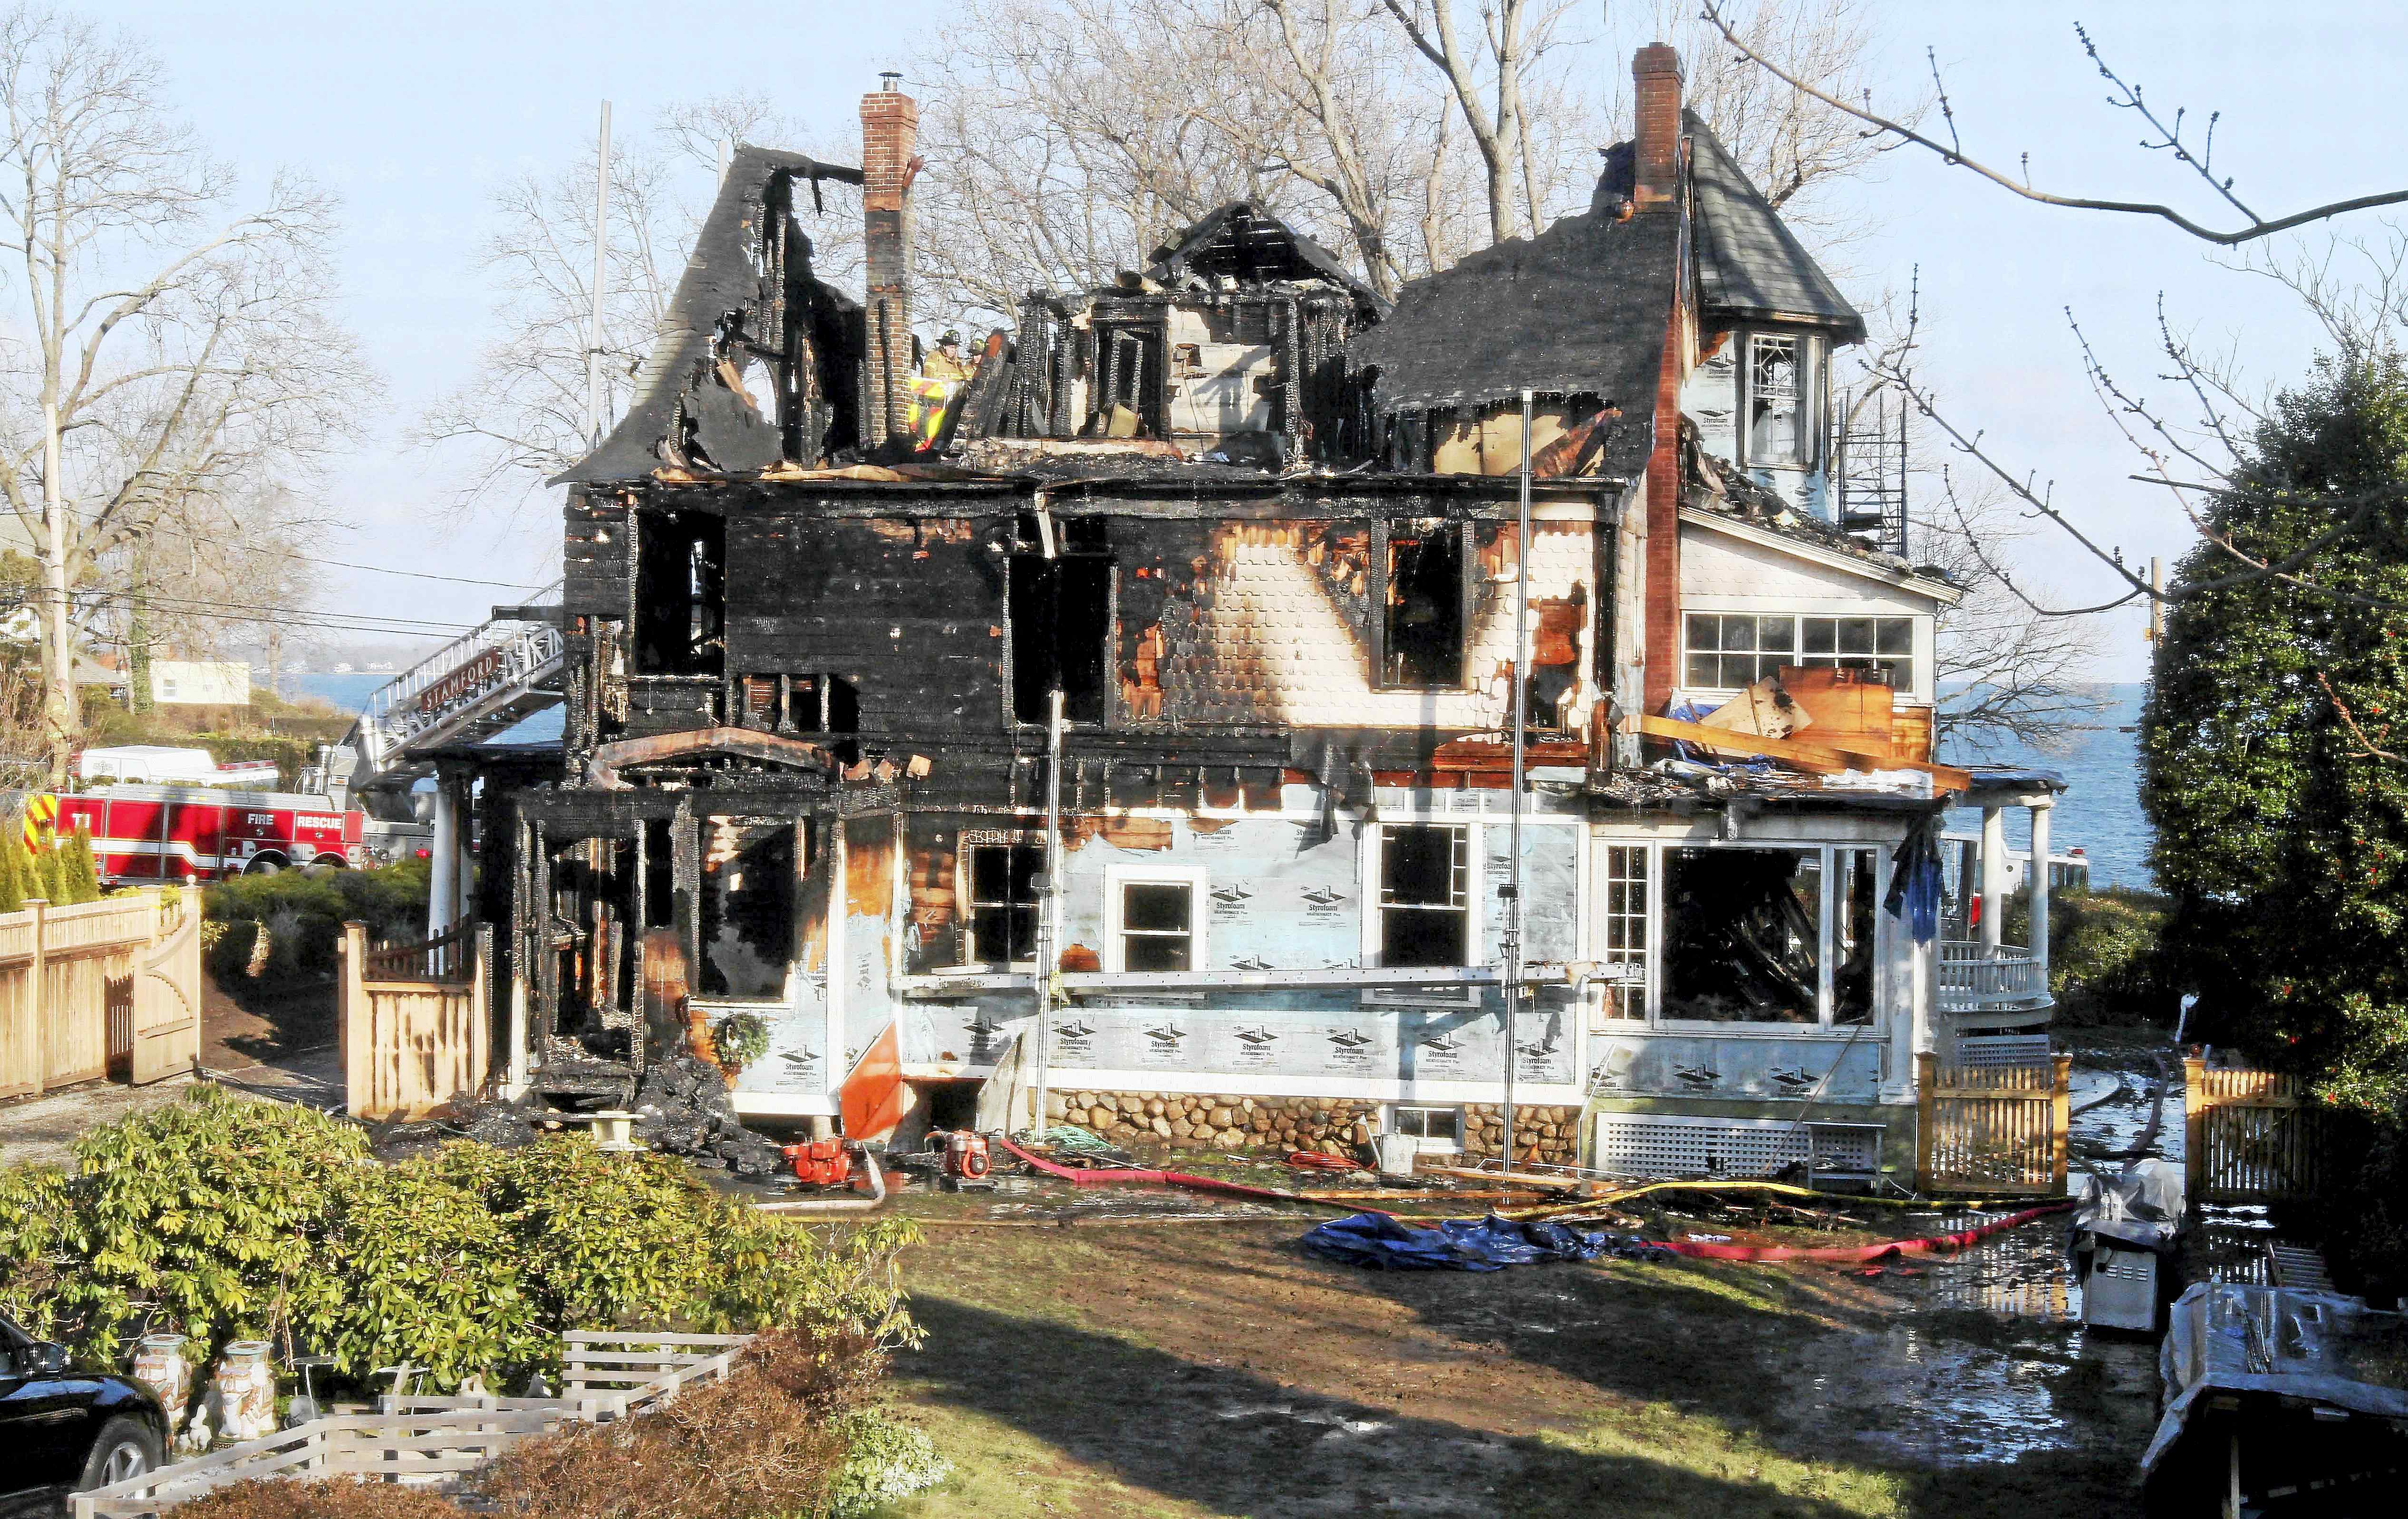 In this Dec. 25, 2011 photo, firefighters investigate a house in Stamford, Conn. where an early morning fire left five people dead. The Hartford Courant reported Monday, May 9, 2016, that in a lawsuit deposition, contractor Michael Borcina said he lied to protect the children’s mother Madonna Badger, who was the one who left a bag of fireplace ashes in a mudroom, which were suspected of causing the fire.